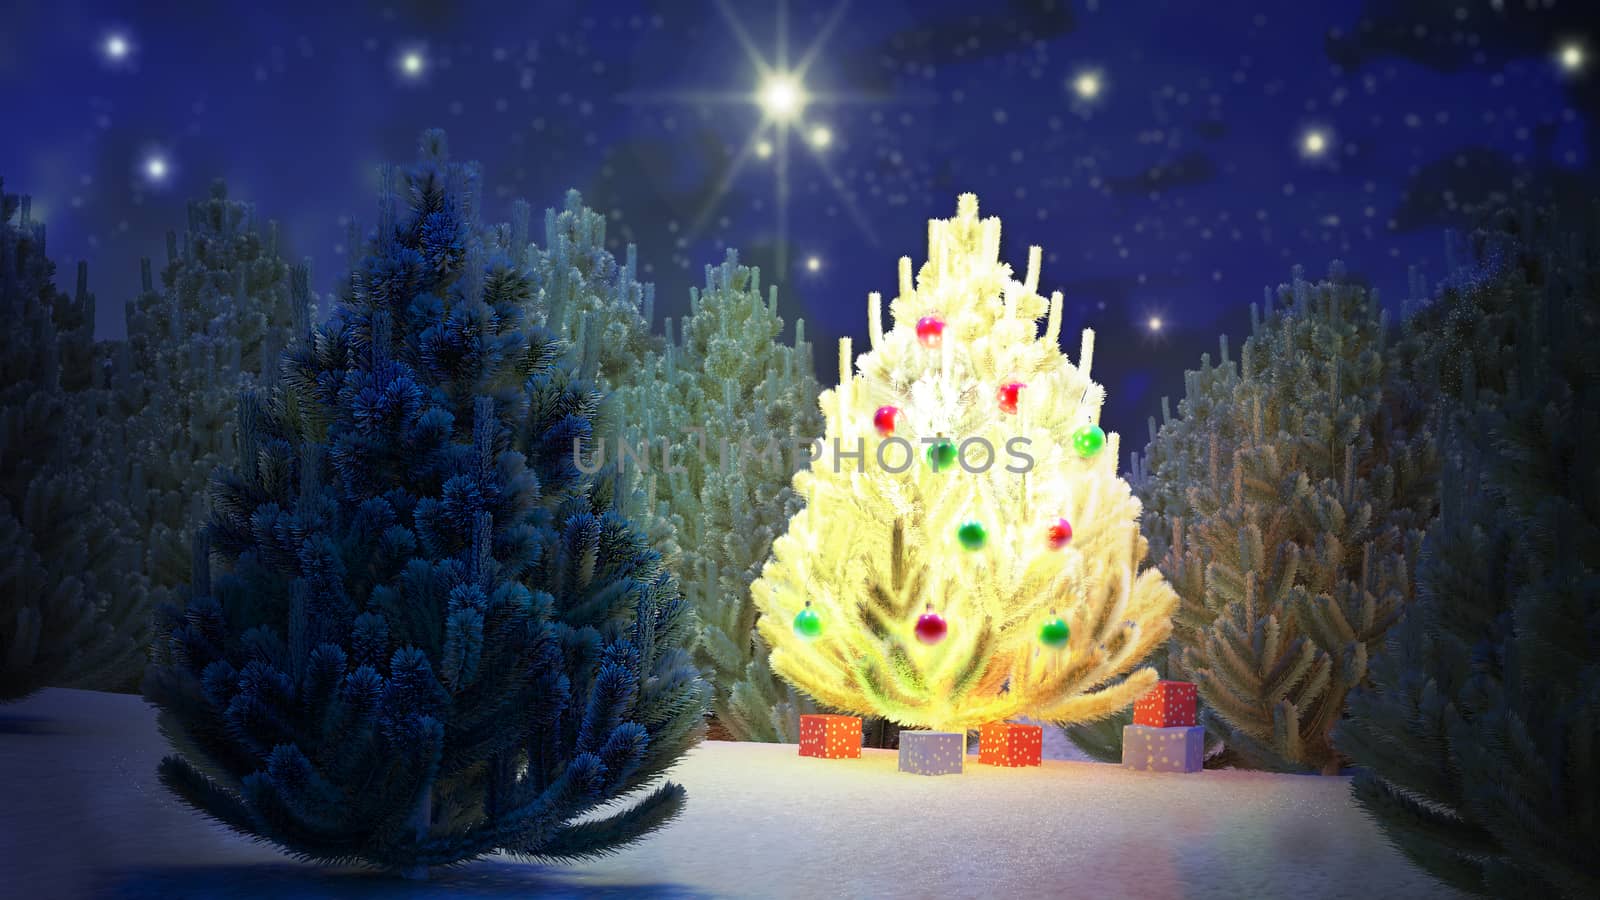 Illustration of a Christmas tree in the middle of a pine forest during the night by ytjo